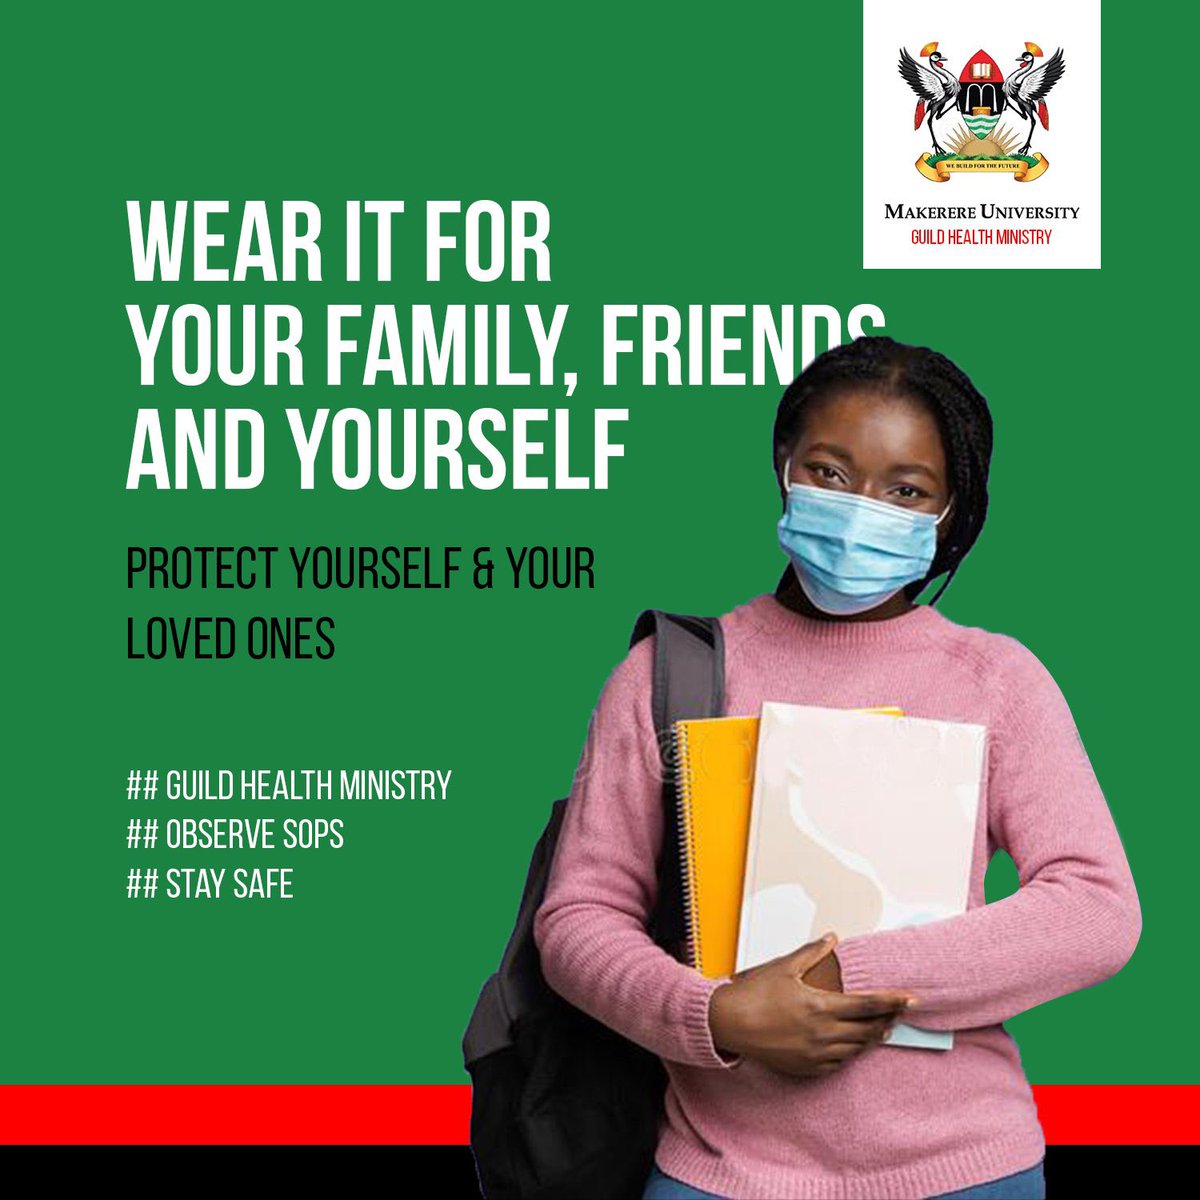 Good to see @MakGuild through its Ministry of Health creating awareness and sensitizing fellow students about Covid-19. #StaySafe